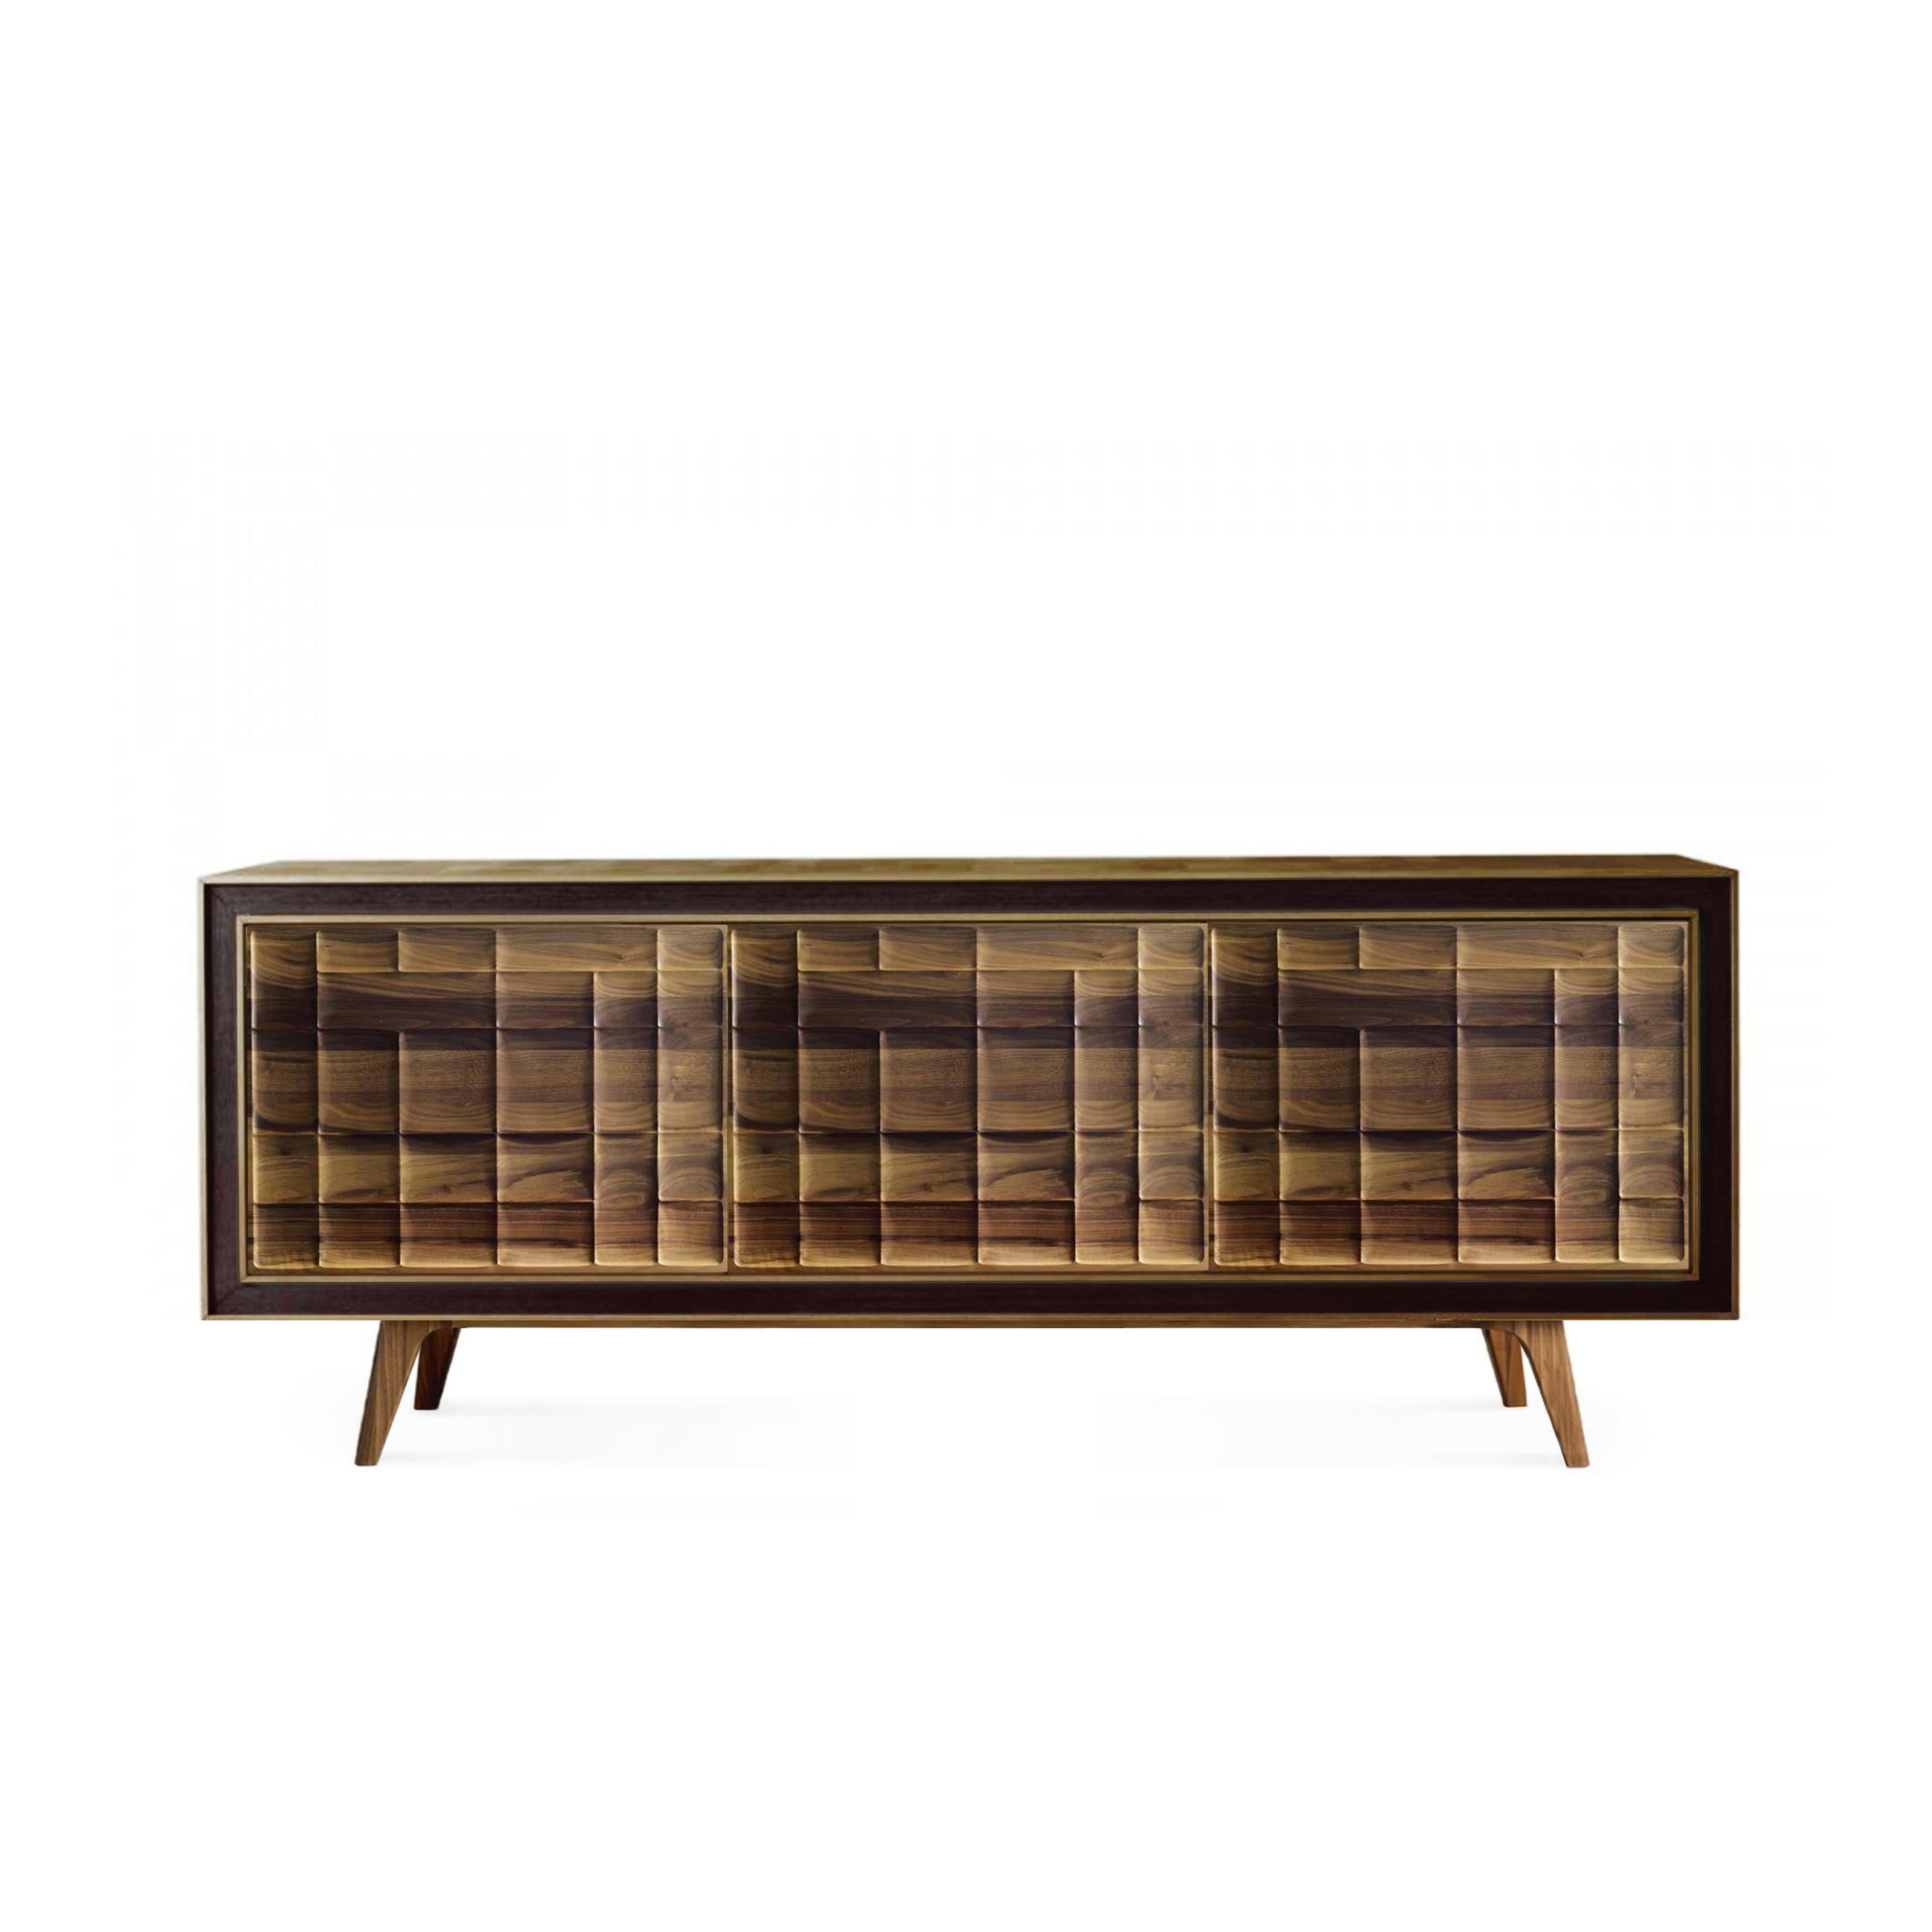 Quadra Scacco Solid Wood Sideboard, Walnut in Natural Finish, Contemporary For Sale 1